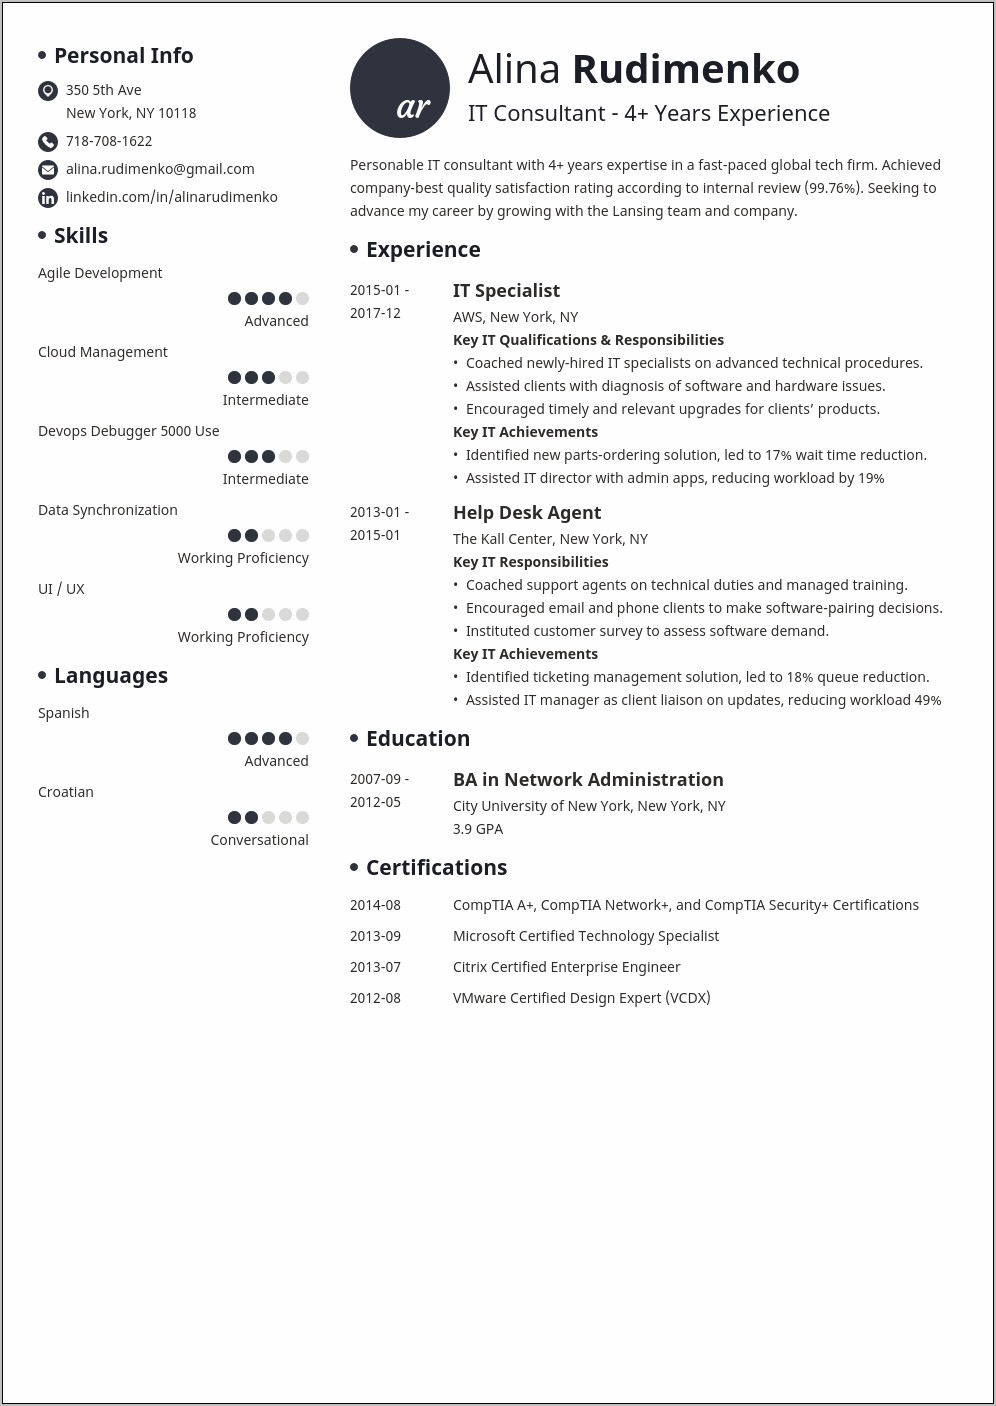 Resume Summary For Information Technology Graduate